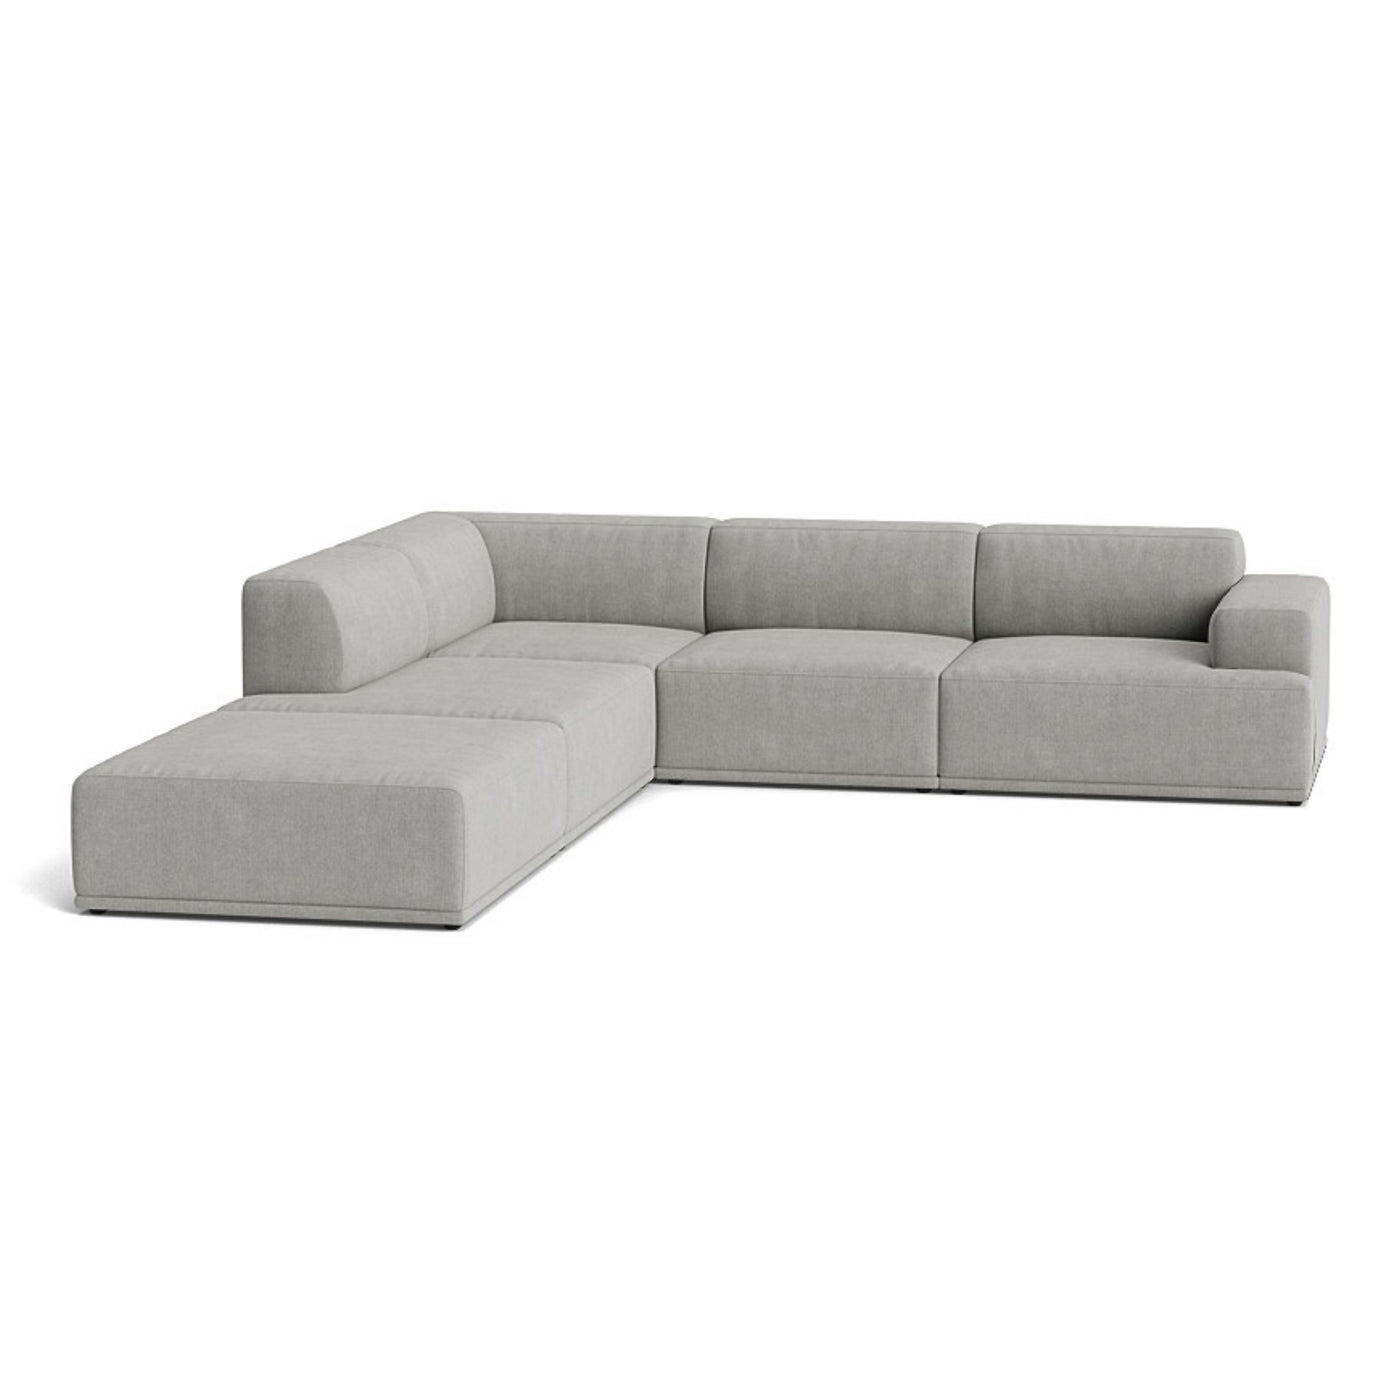 Muuto Connect Soft Modular Corner Sofa, configuration 1. Made-to-order from someday designs. #colour_fiord-151